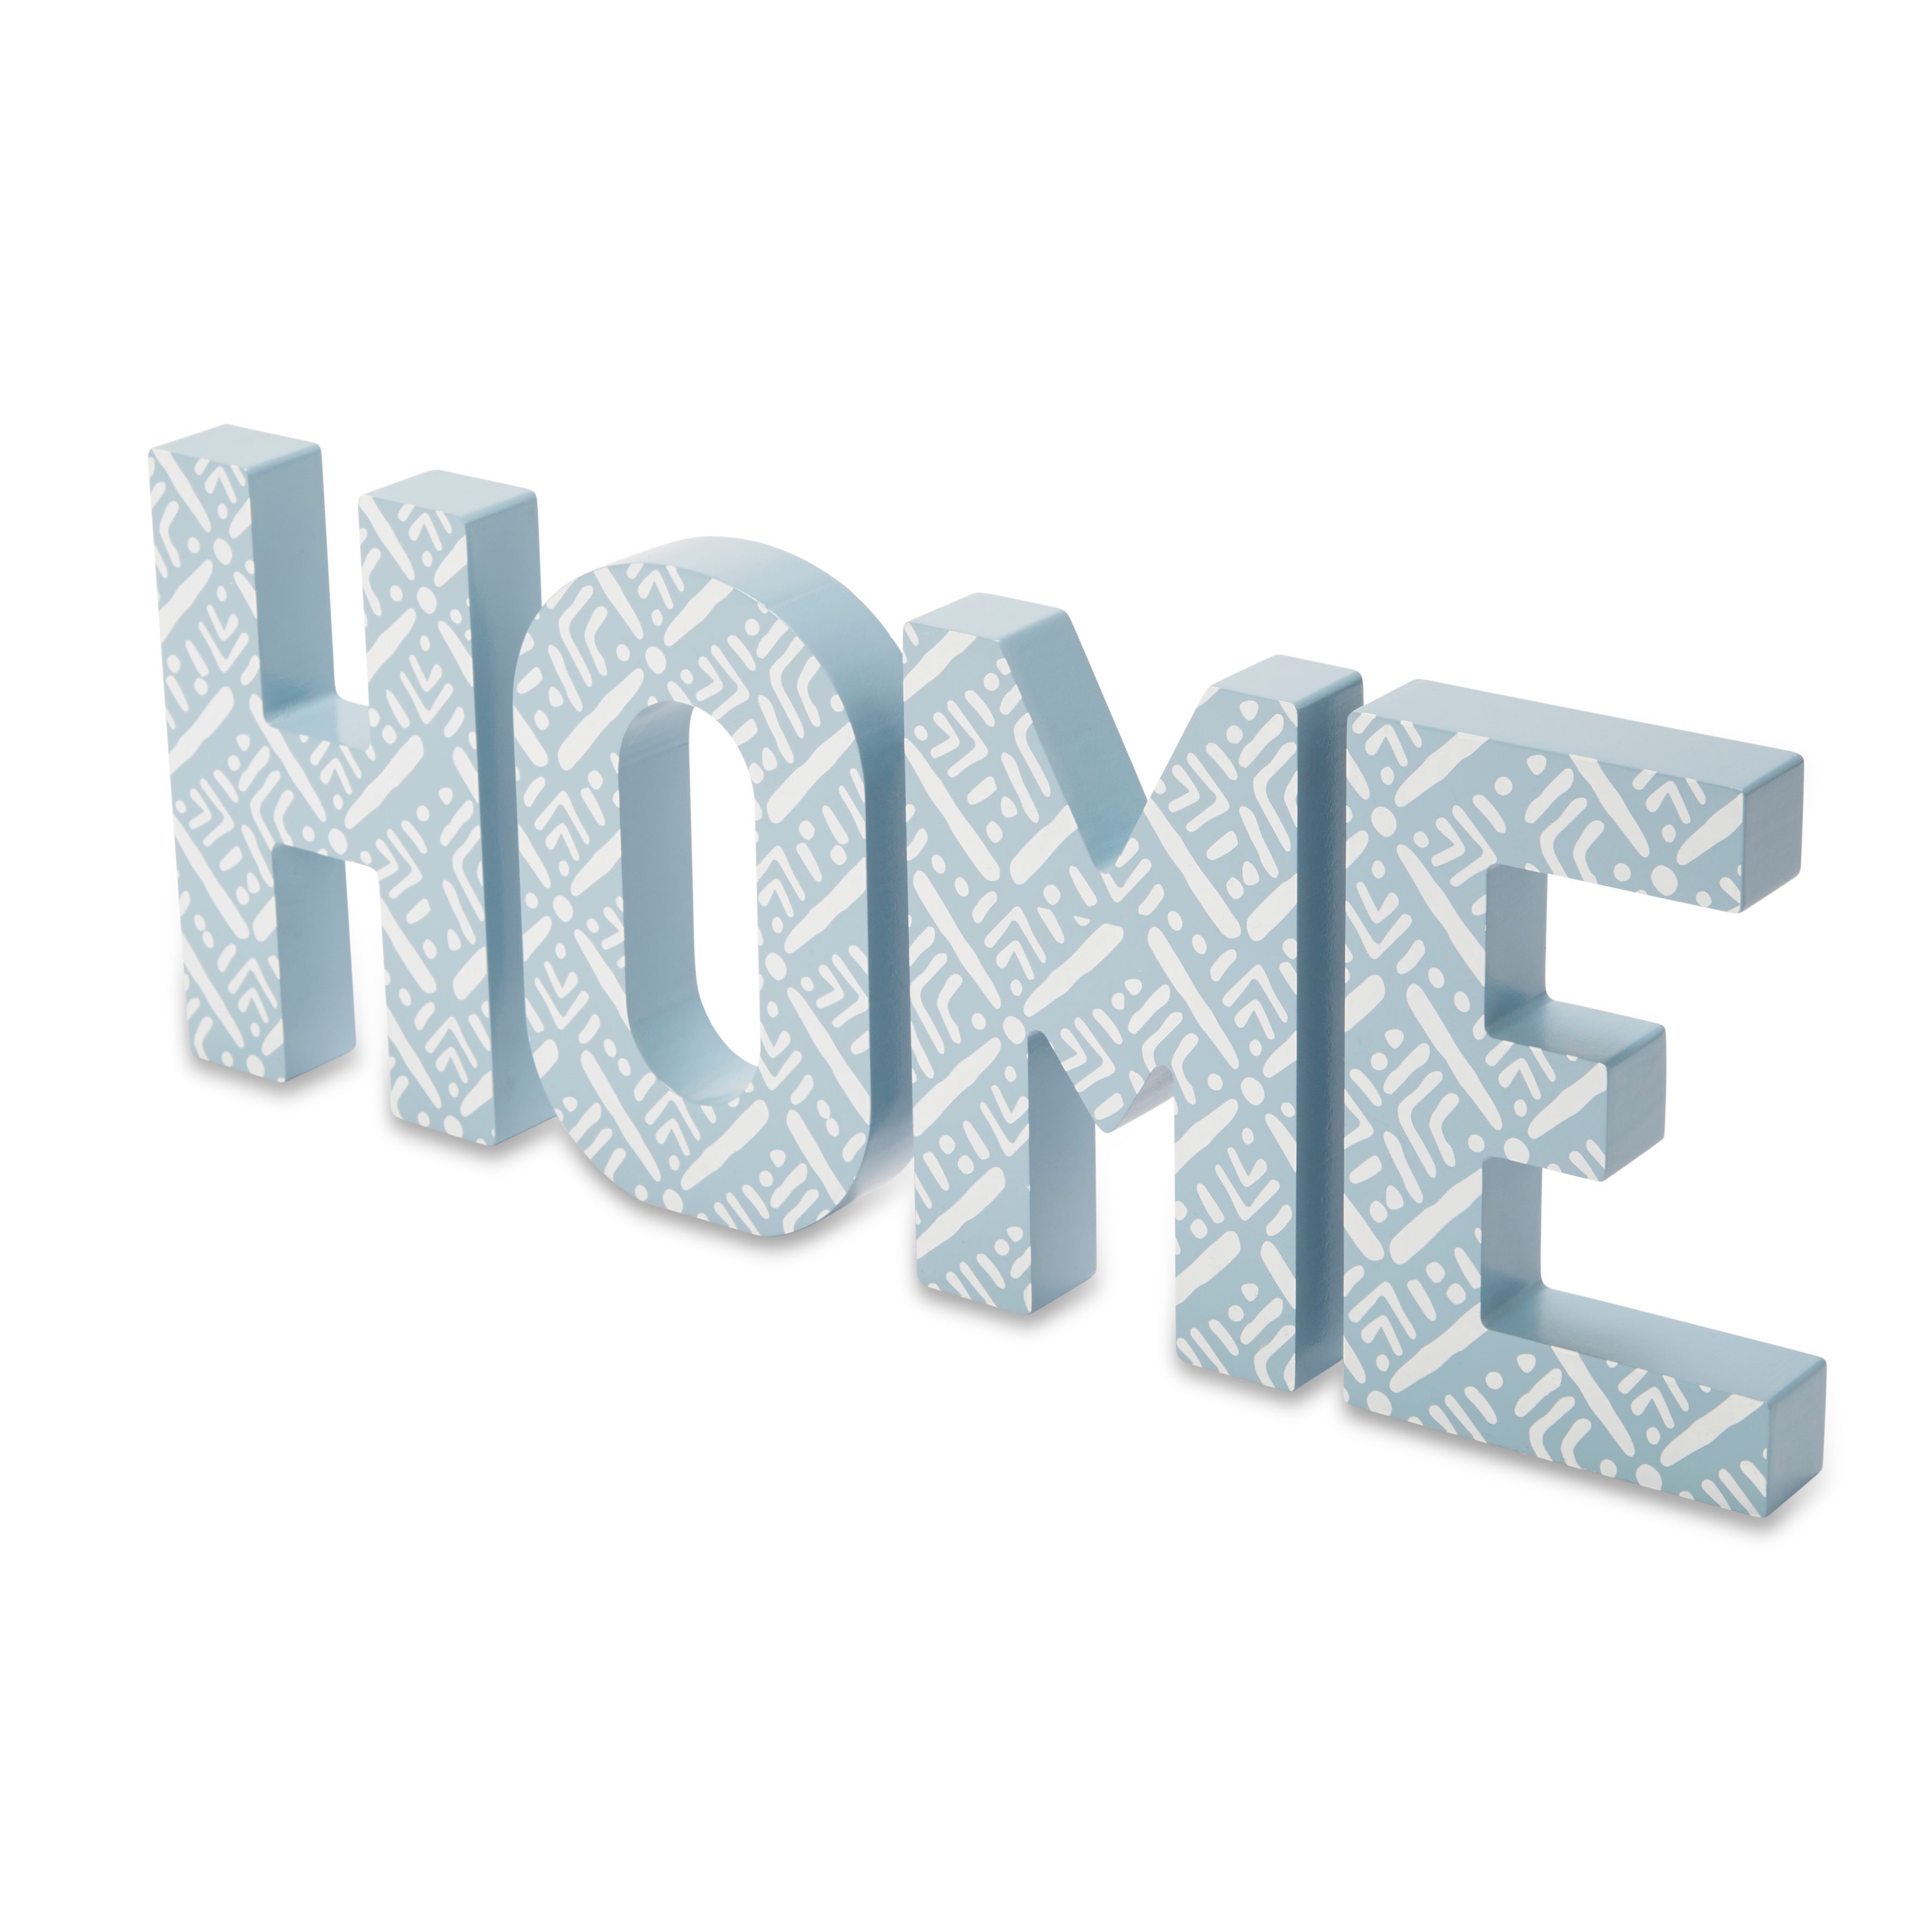 Patterned 'home' Wood Word block, Blue